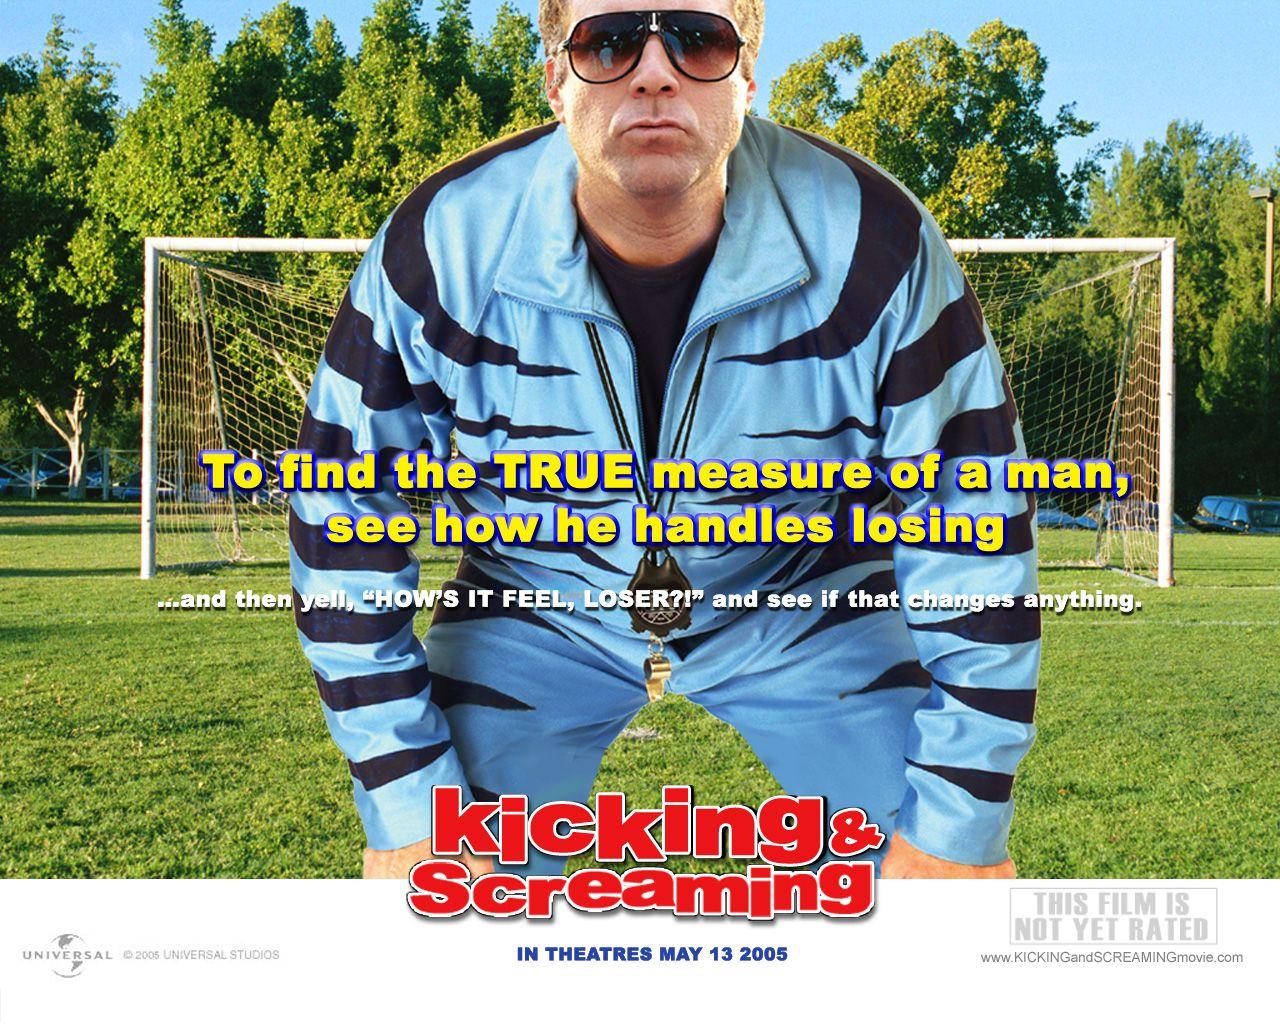 Will Ferrell Ferrell in Kicking and Screaming Wallpaper 4